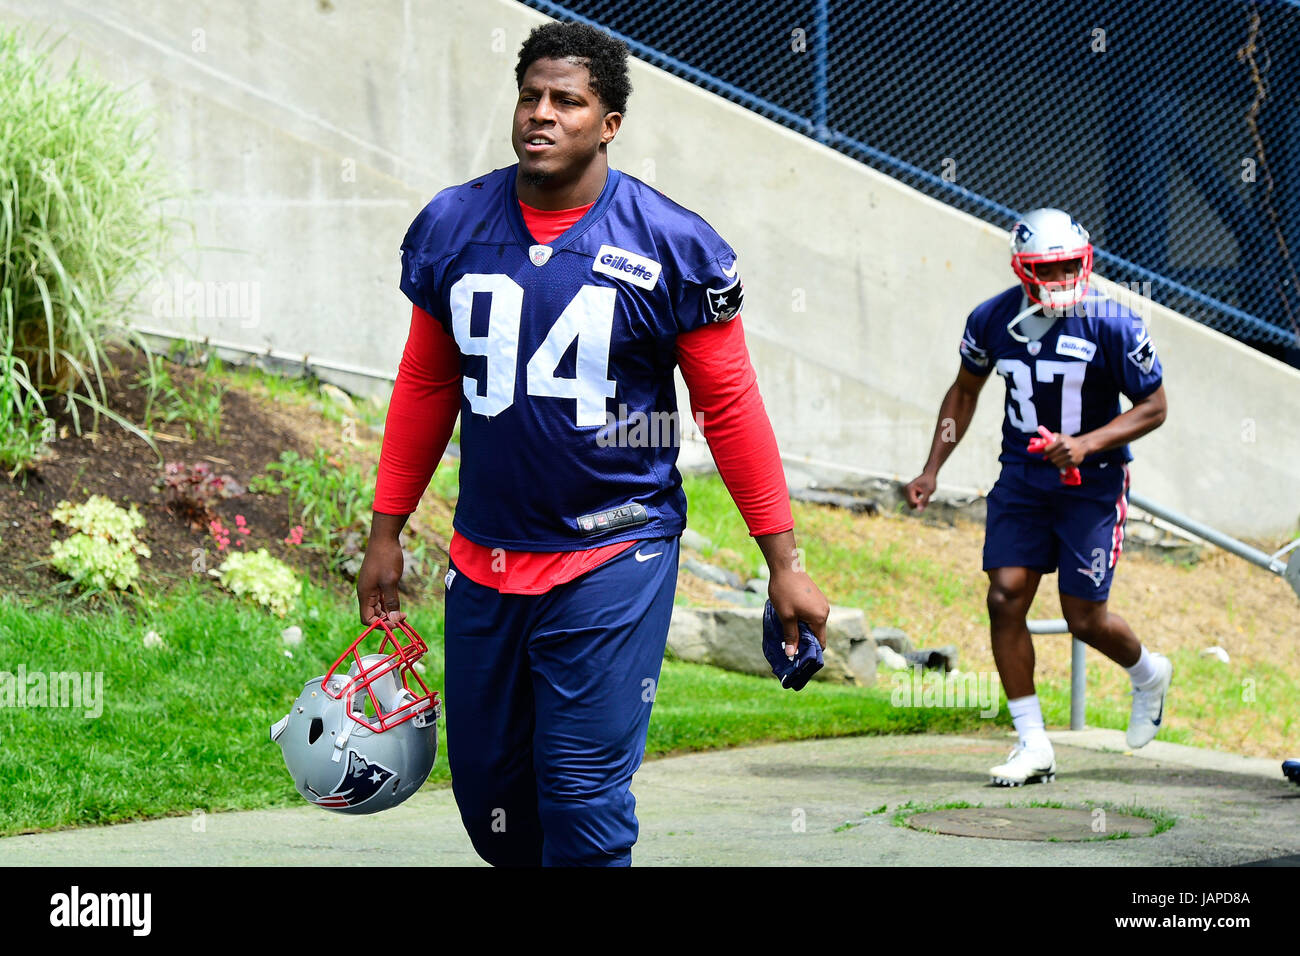 Foxborough, Massachusetts, USA. 7th June, 2017. New England Patriots defensive end Kony Ealy (94) walks to practice at the New England Patriots mini camp held on the practice field at Gillette Stadium, in Foxborough, Massachusetts. Eric Canha/CSM/Alamy Live News Stock Photo